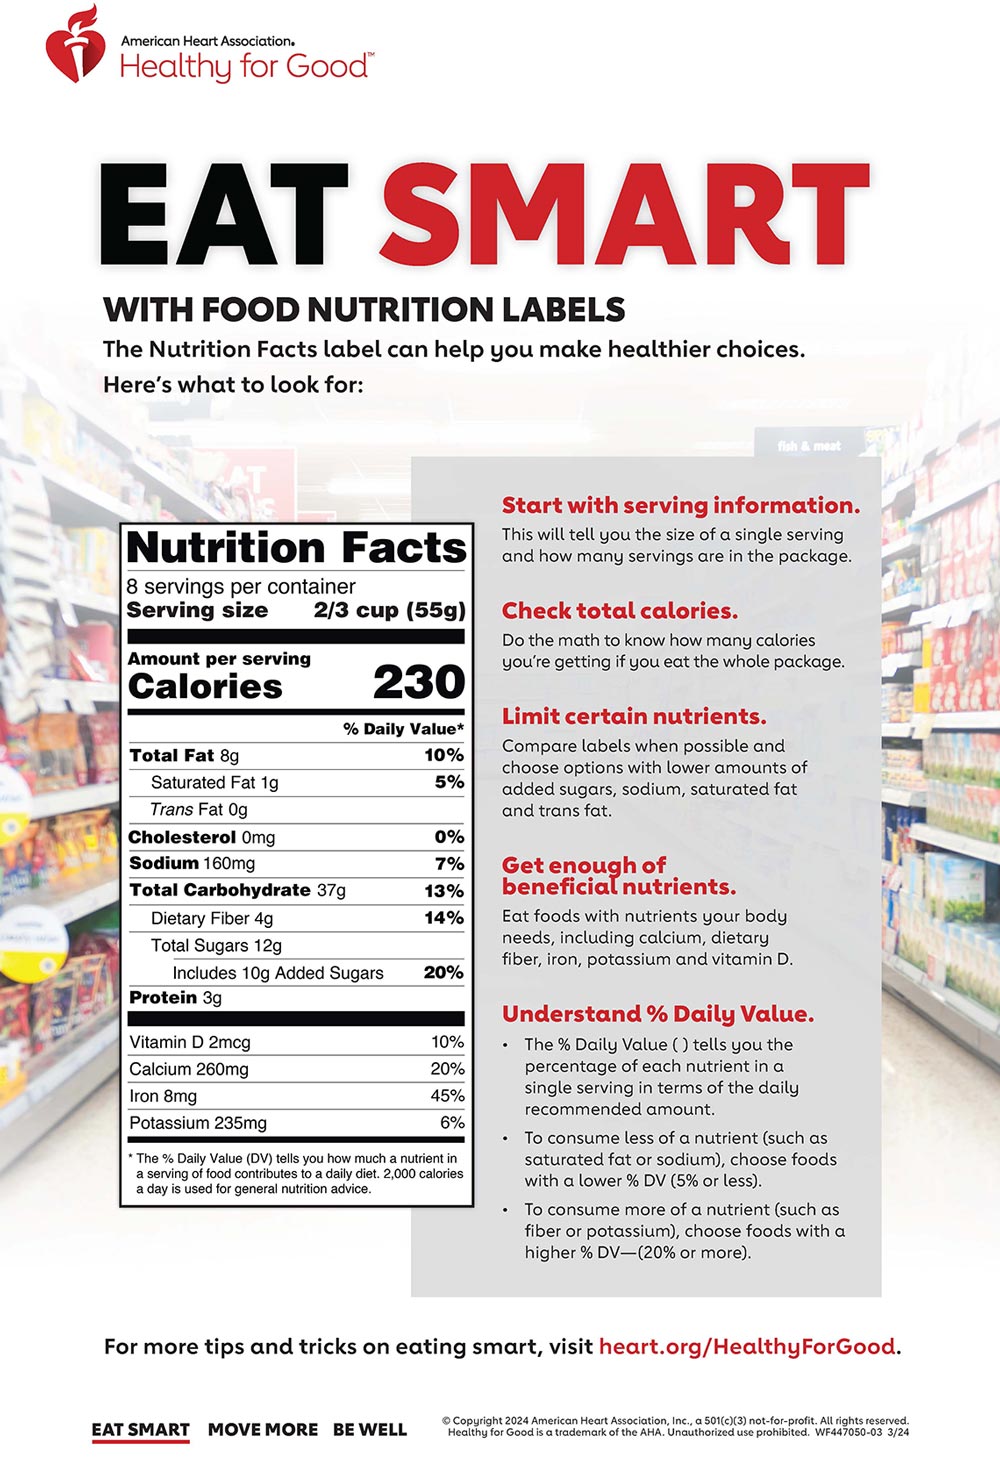 How to Read a Nutrition Label: The Main Points to Consider